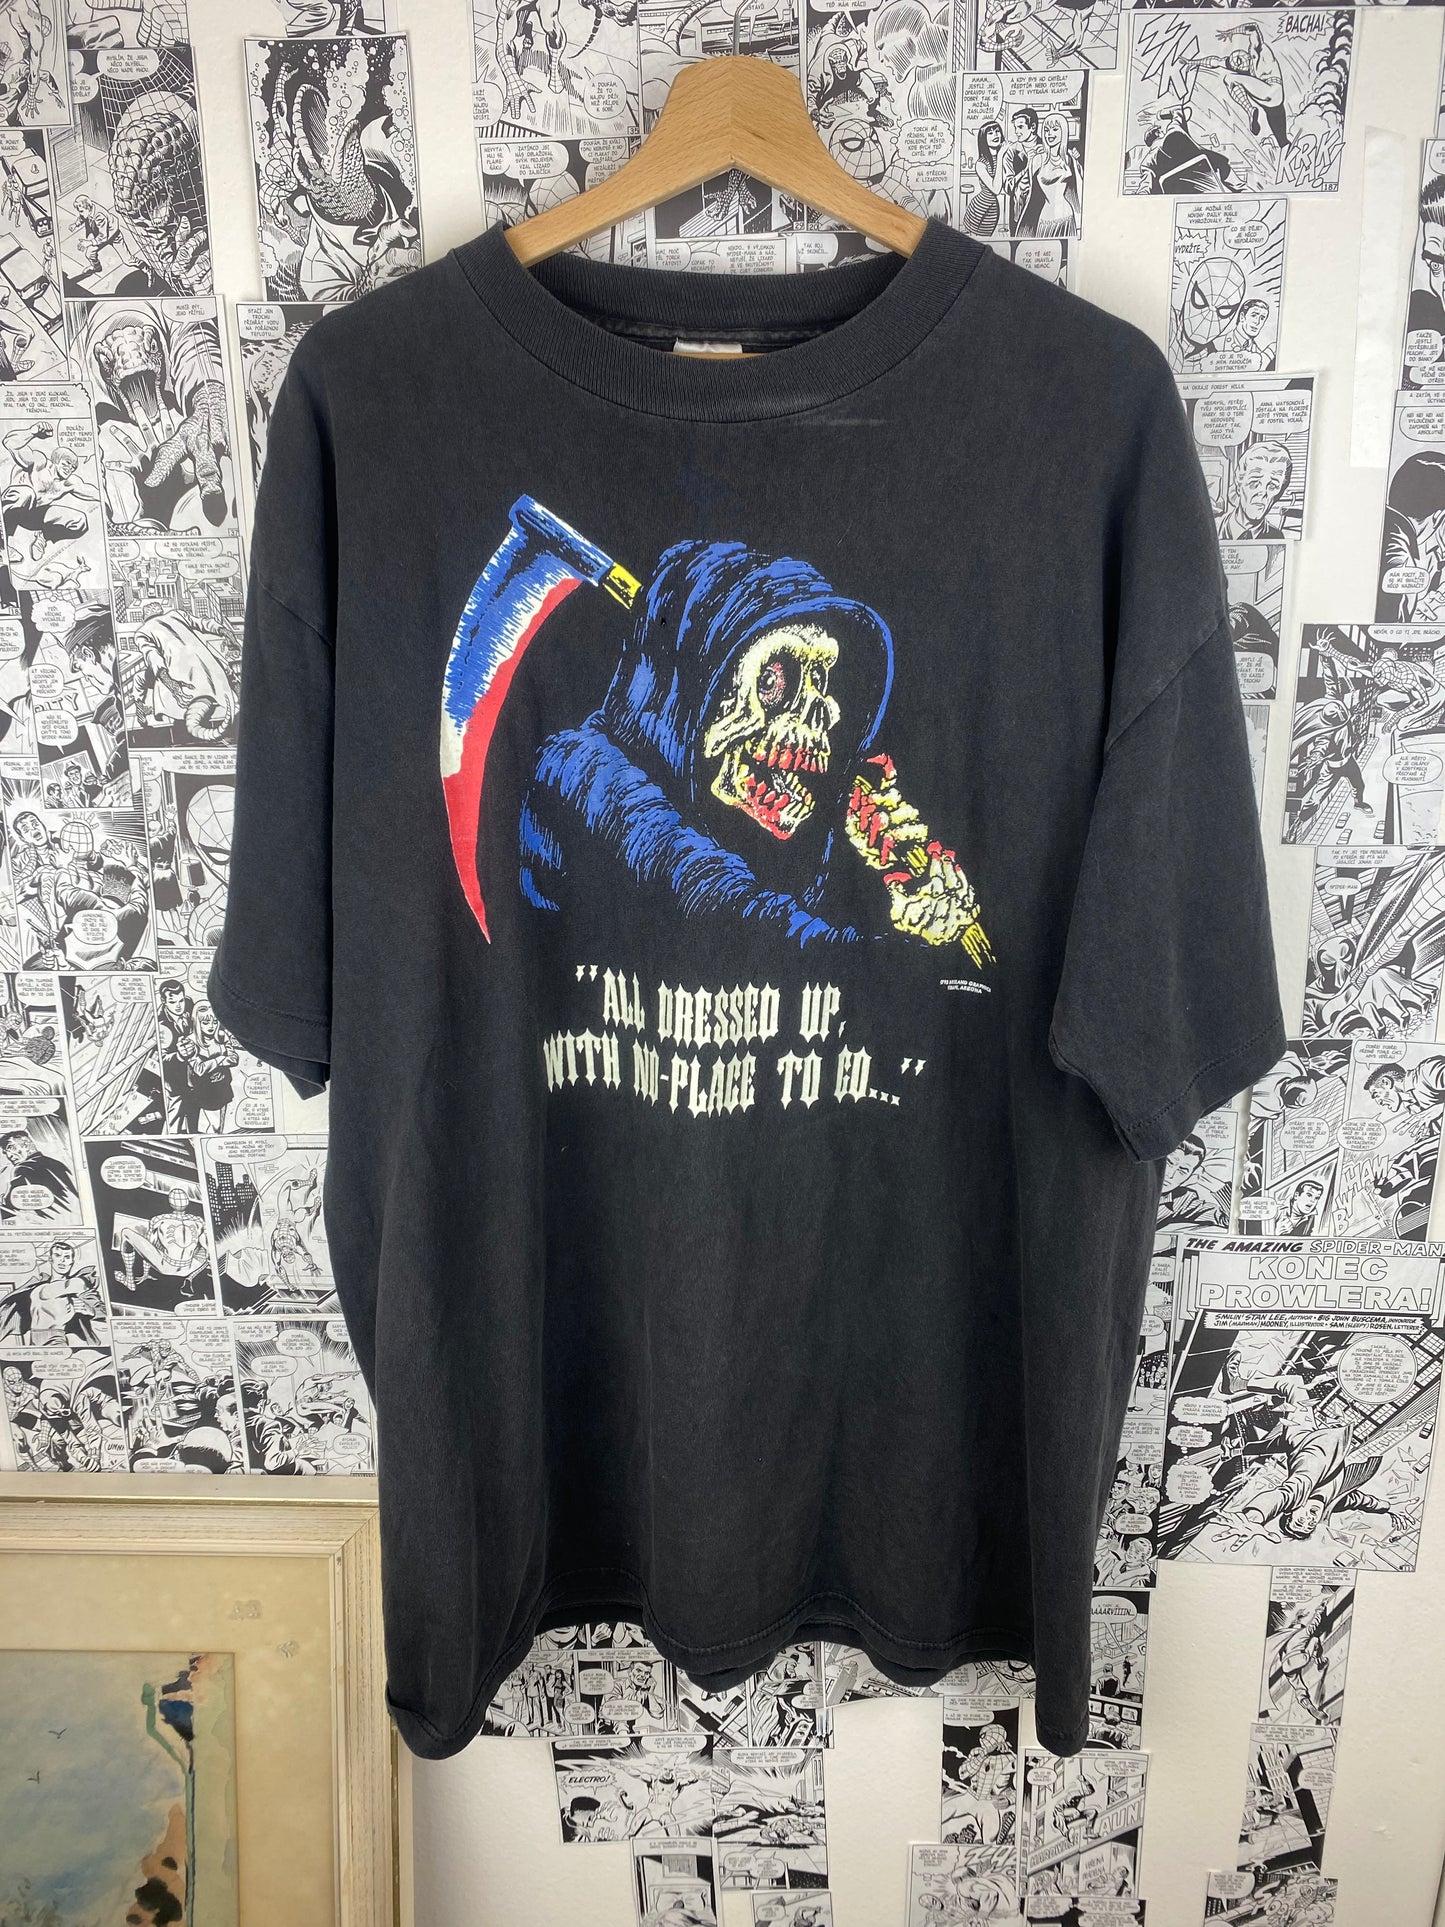 Vintage “All dressed up, with nowhere to go” death t-shirt - size XL